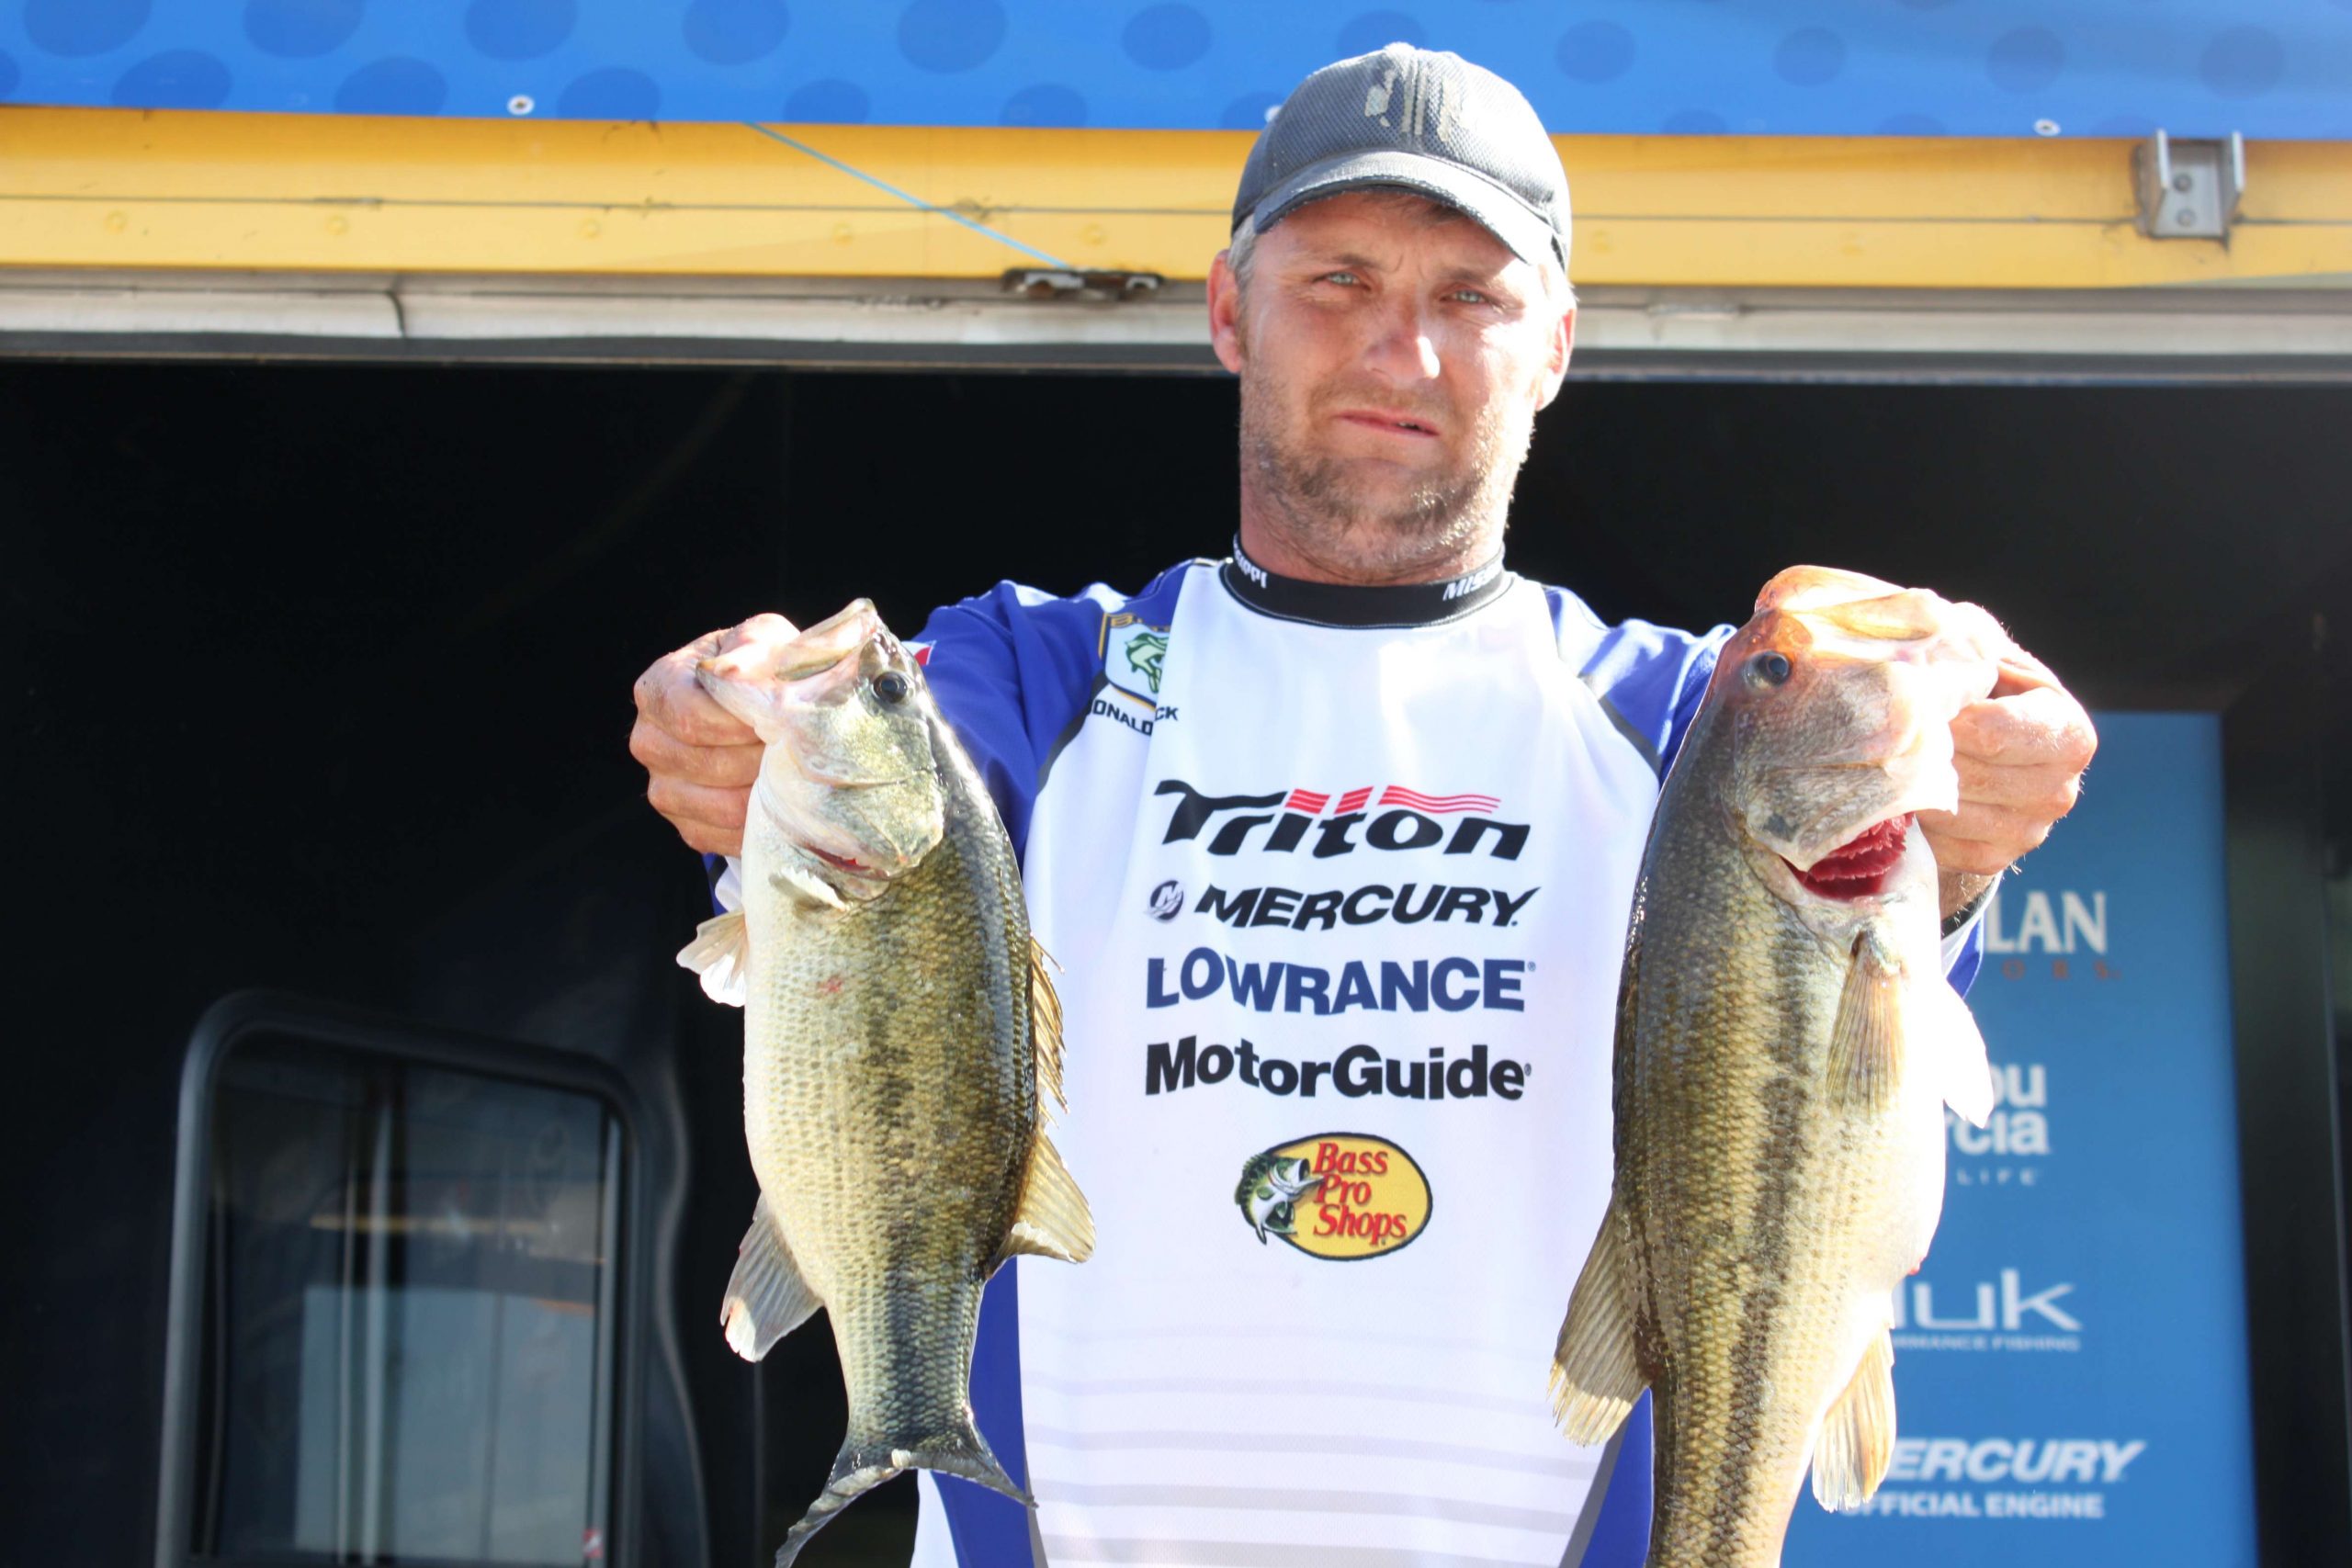 Donald Adcock of Mississippi is 29th among boaters with 28-10.